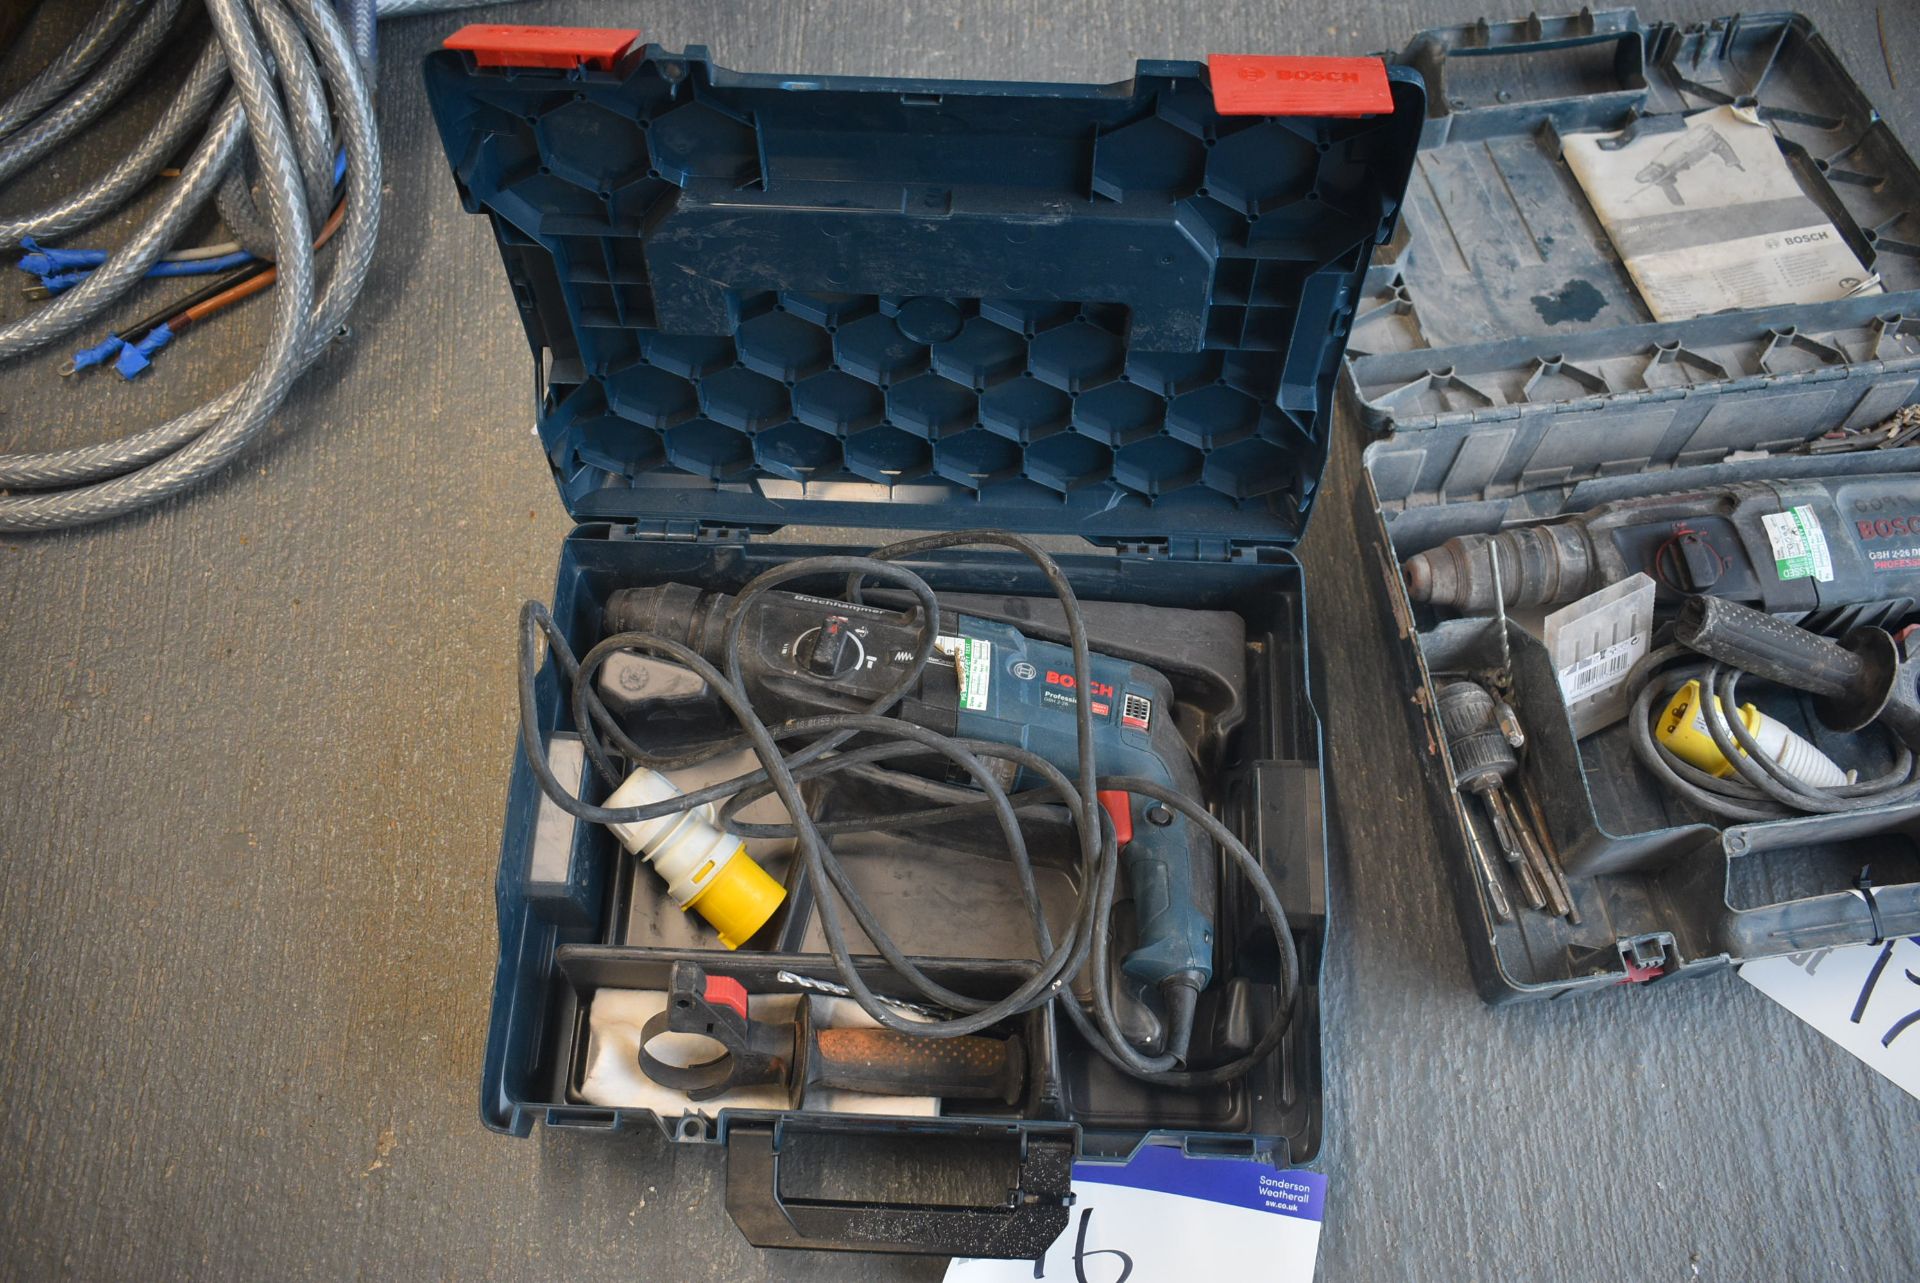 Bosch GBH 2-28 Portable Electric Hammer Drill, 110V, with carry casePlease read the following